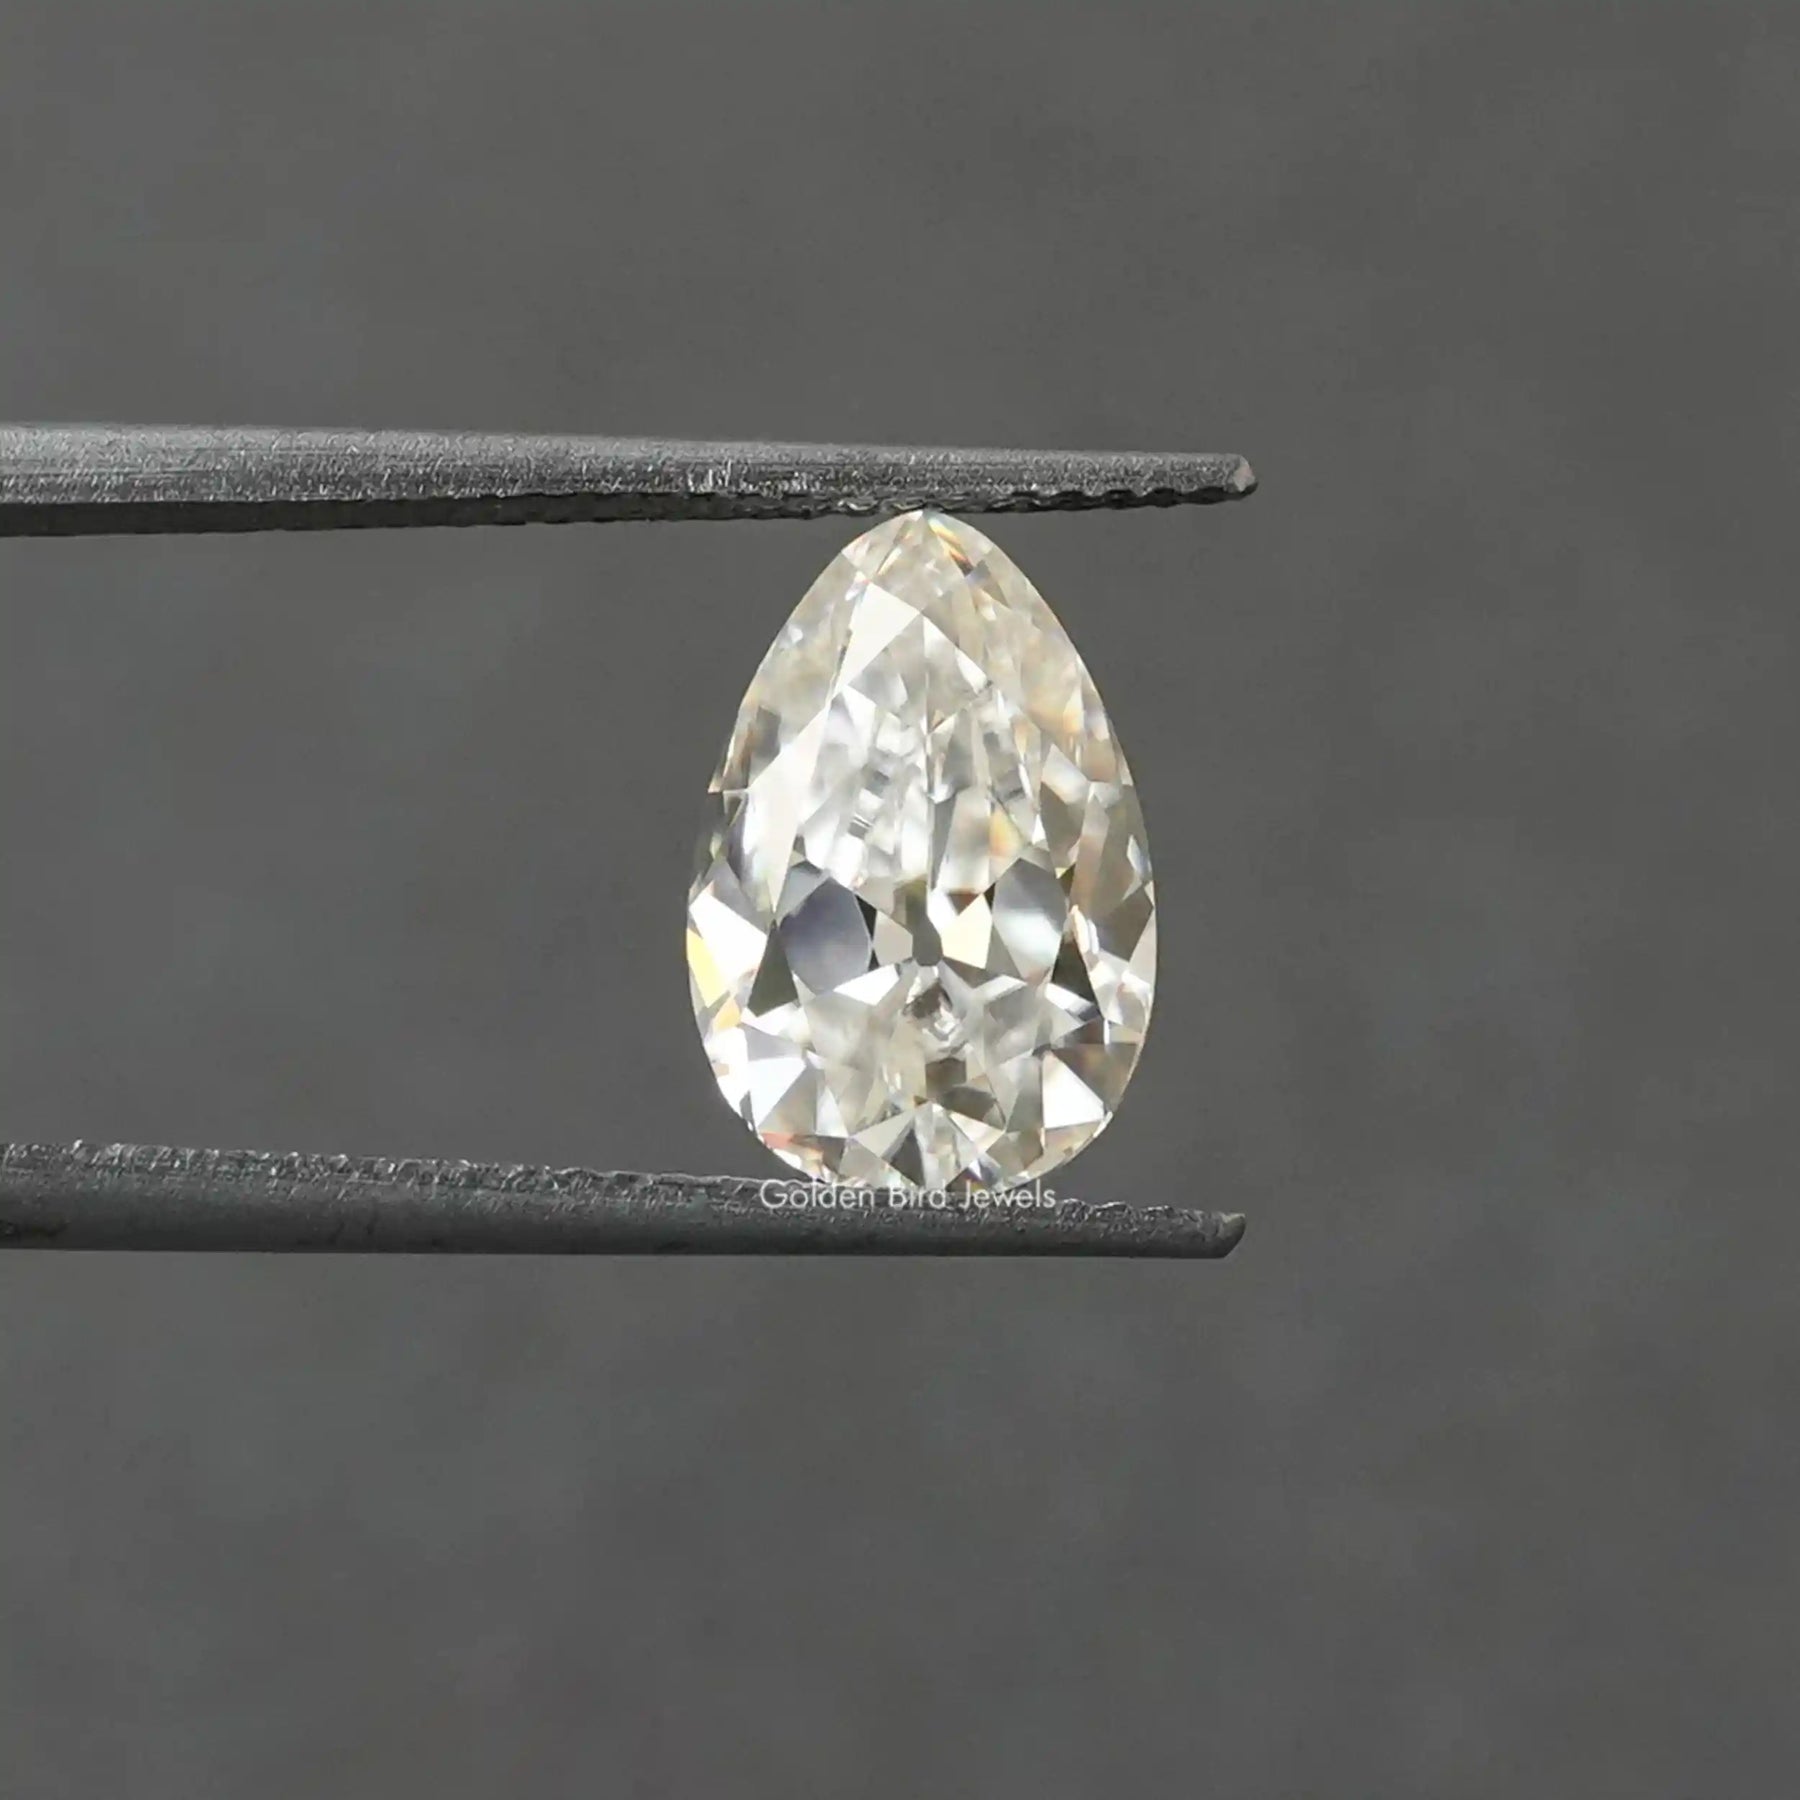 [Front view of pear shaped loose moissanite stone]-[Golden Bird Jewels]